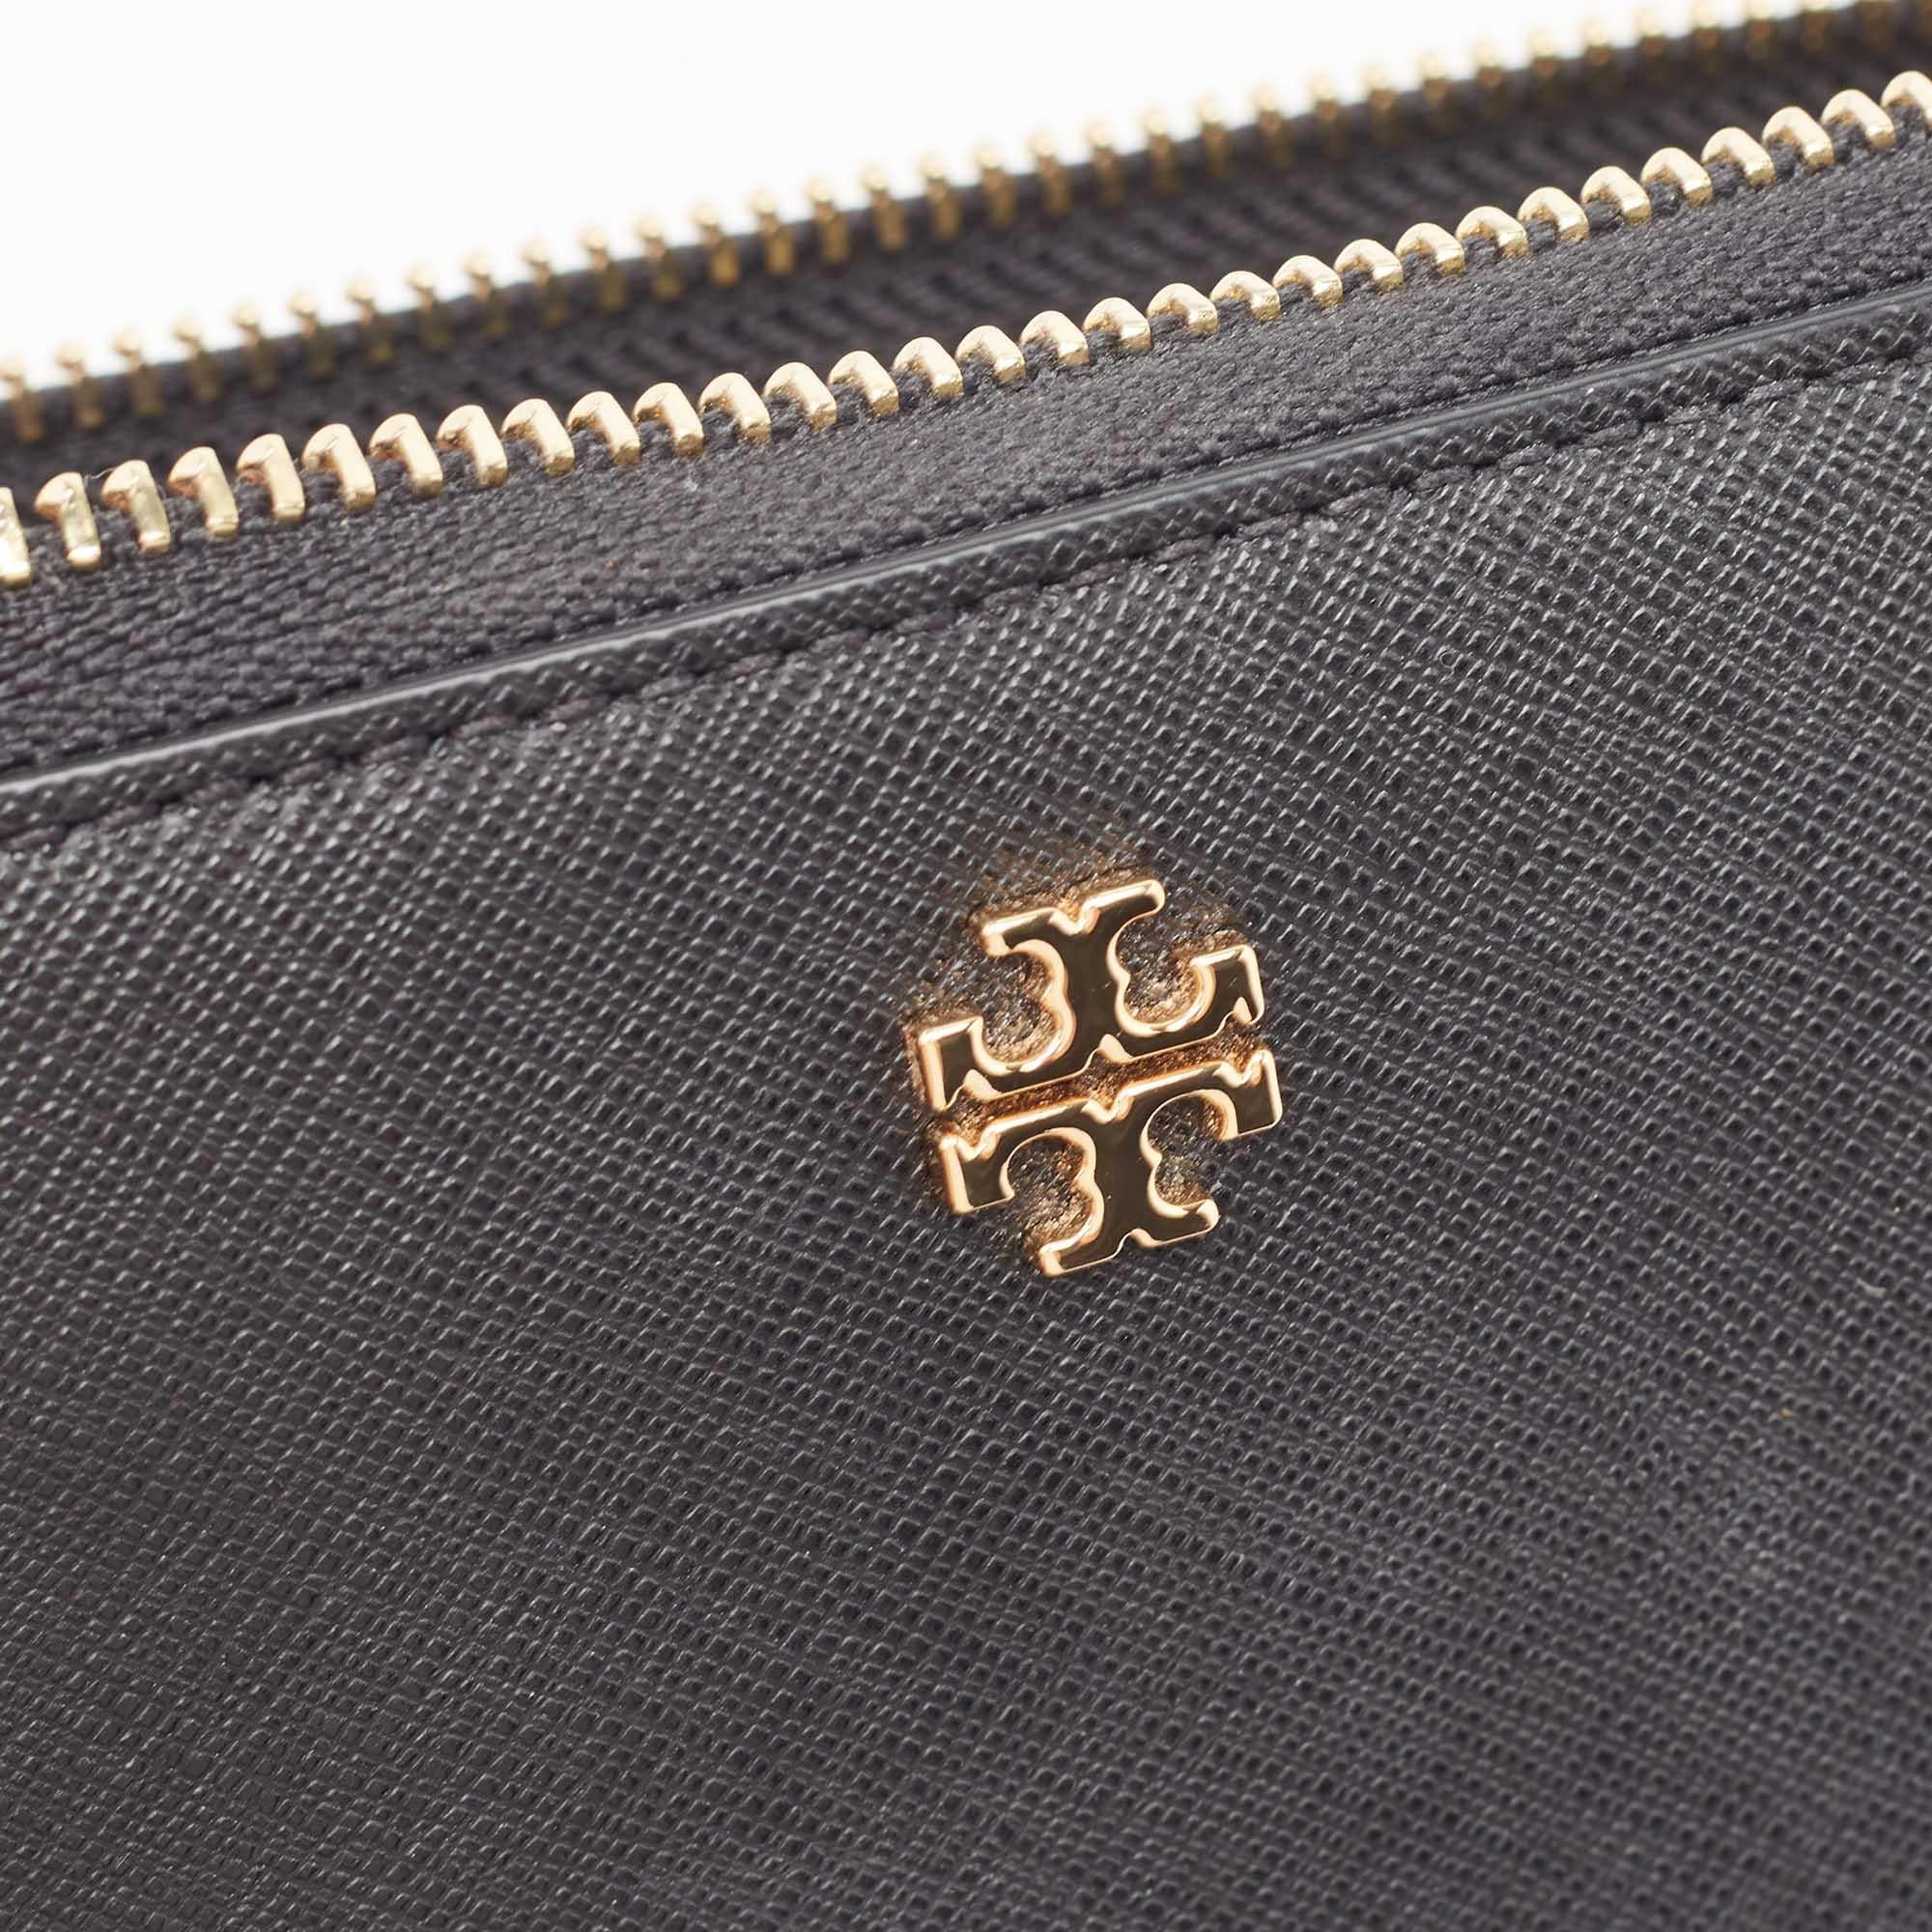 Tory Burch Black Leather Robinson Flap Continental Wallet For Sale 2